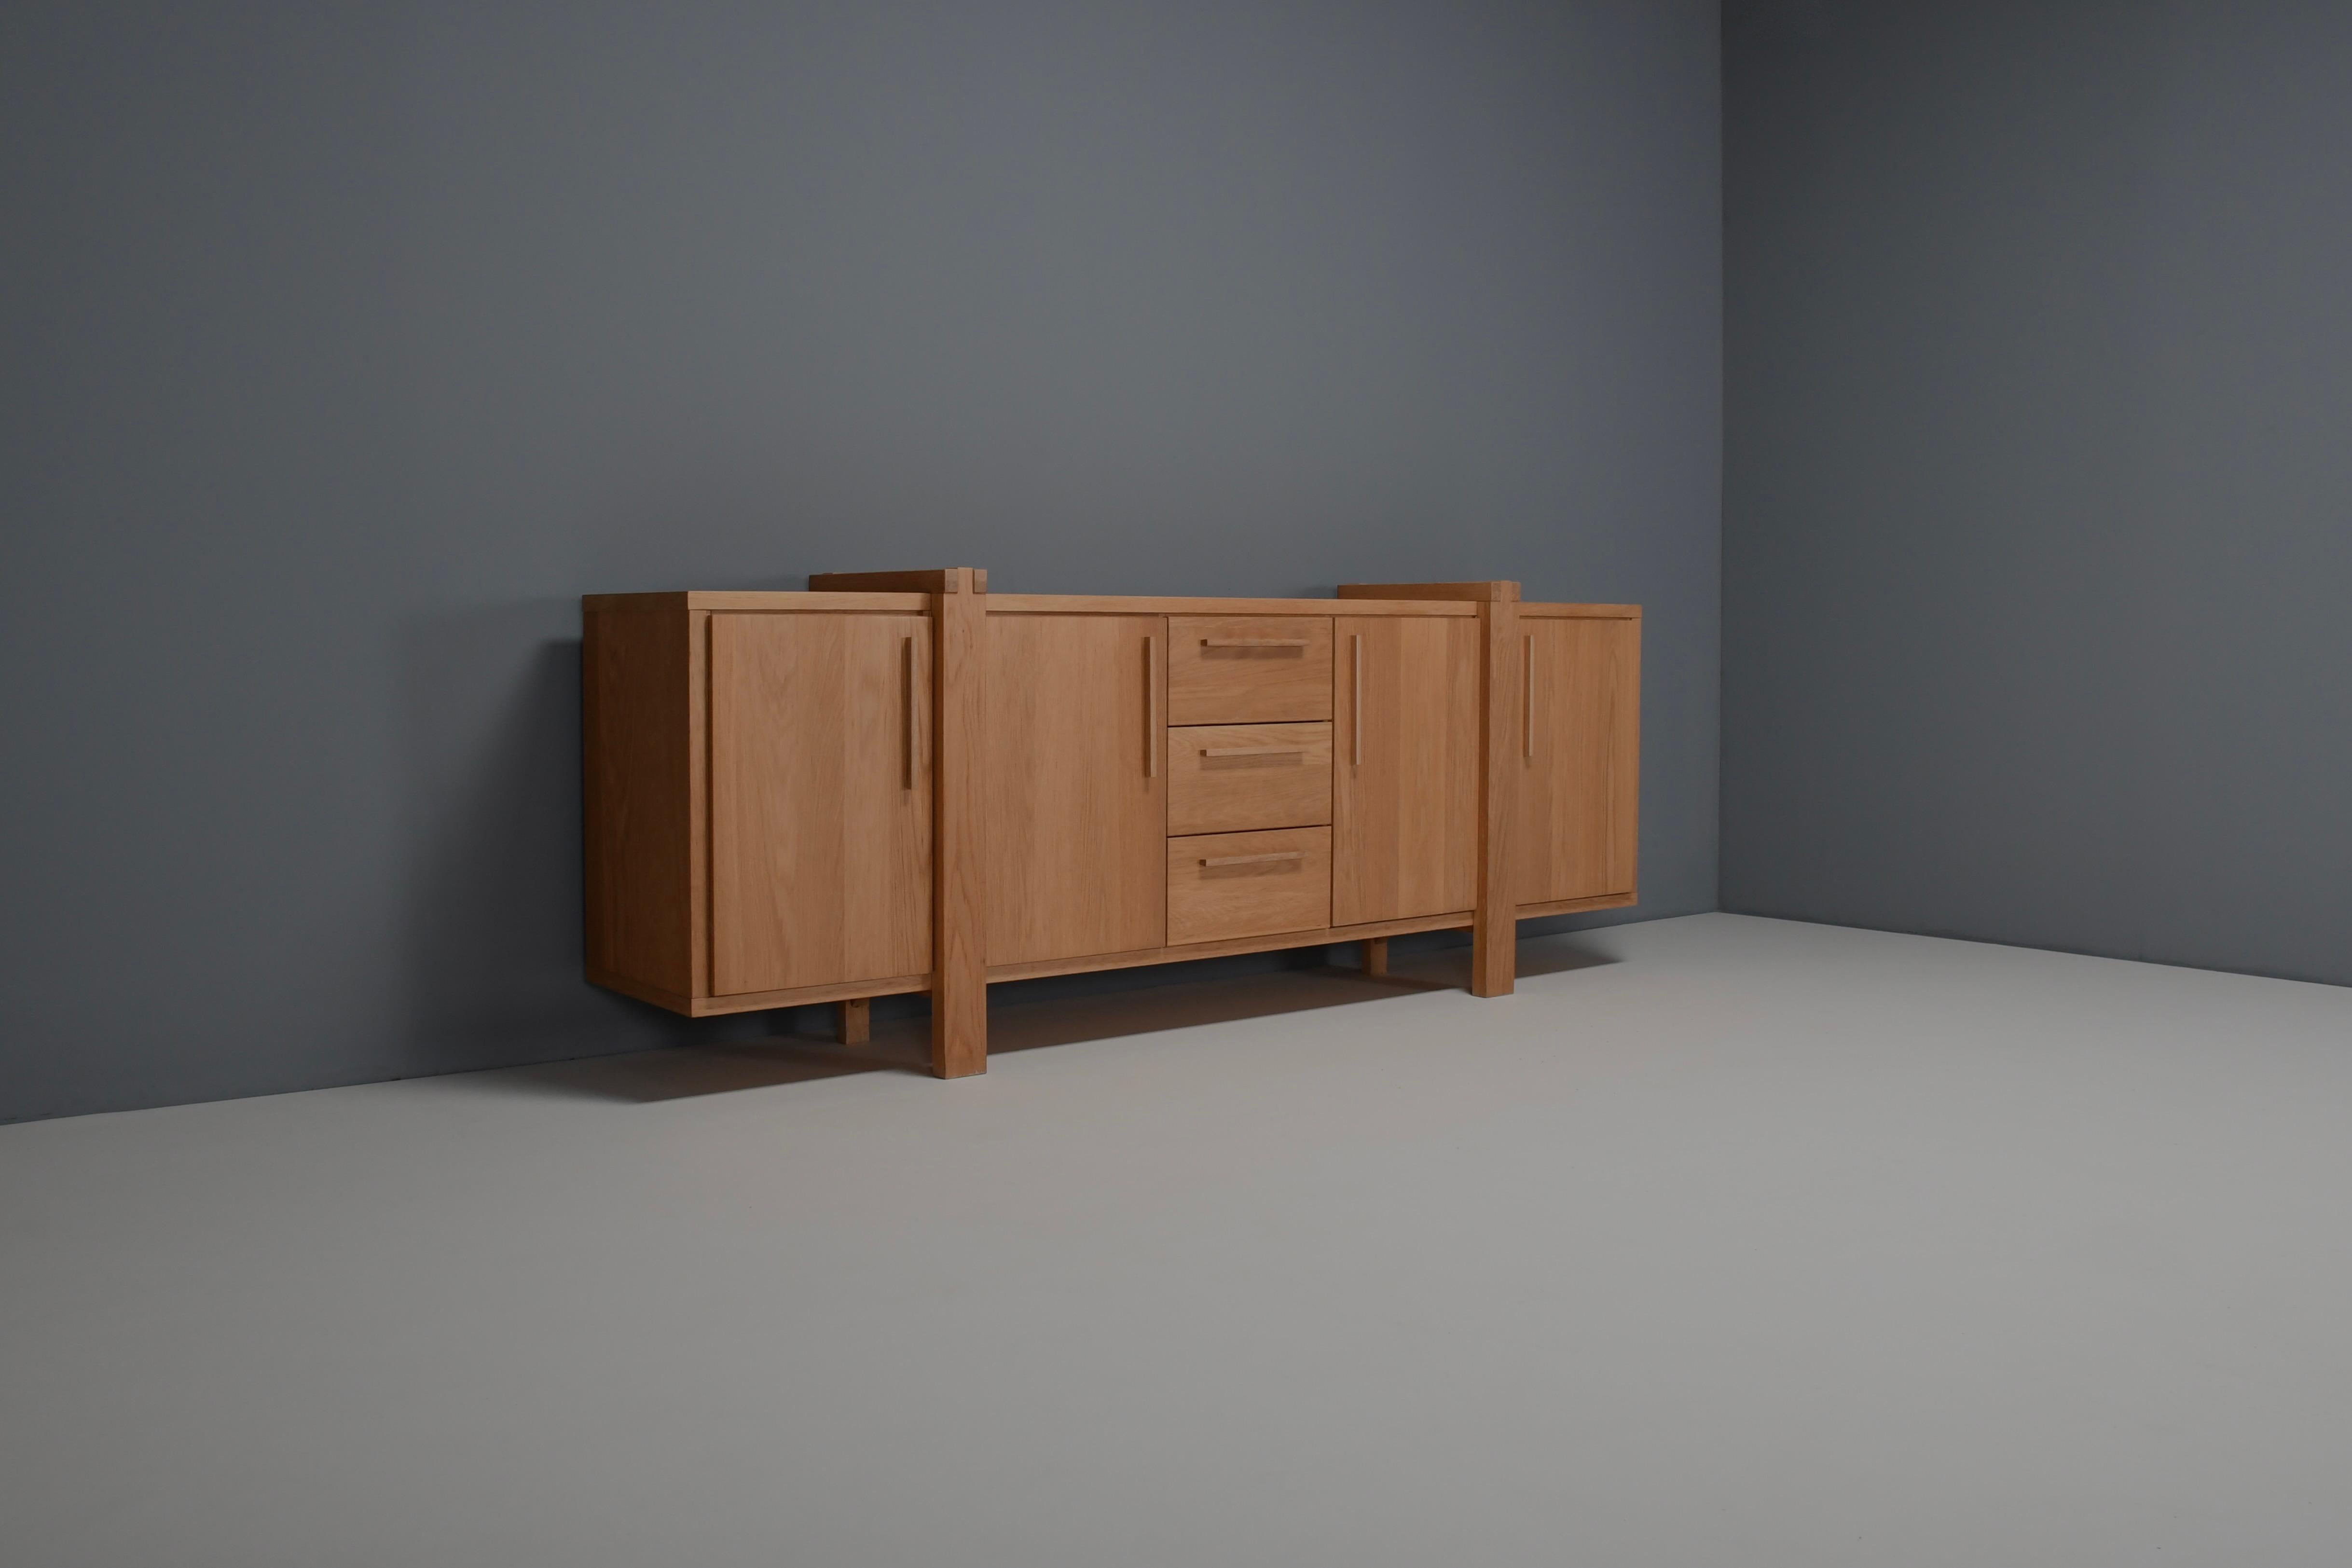 Beautifully crafted Belgian Sideboard in very good condition.

This credenza combines a simplified layout executed within a complex design, and solid construction details.

It is made in a beautiful light oak which gives the sideboard a natural